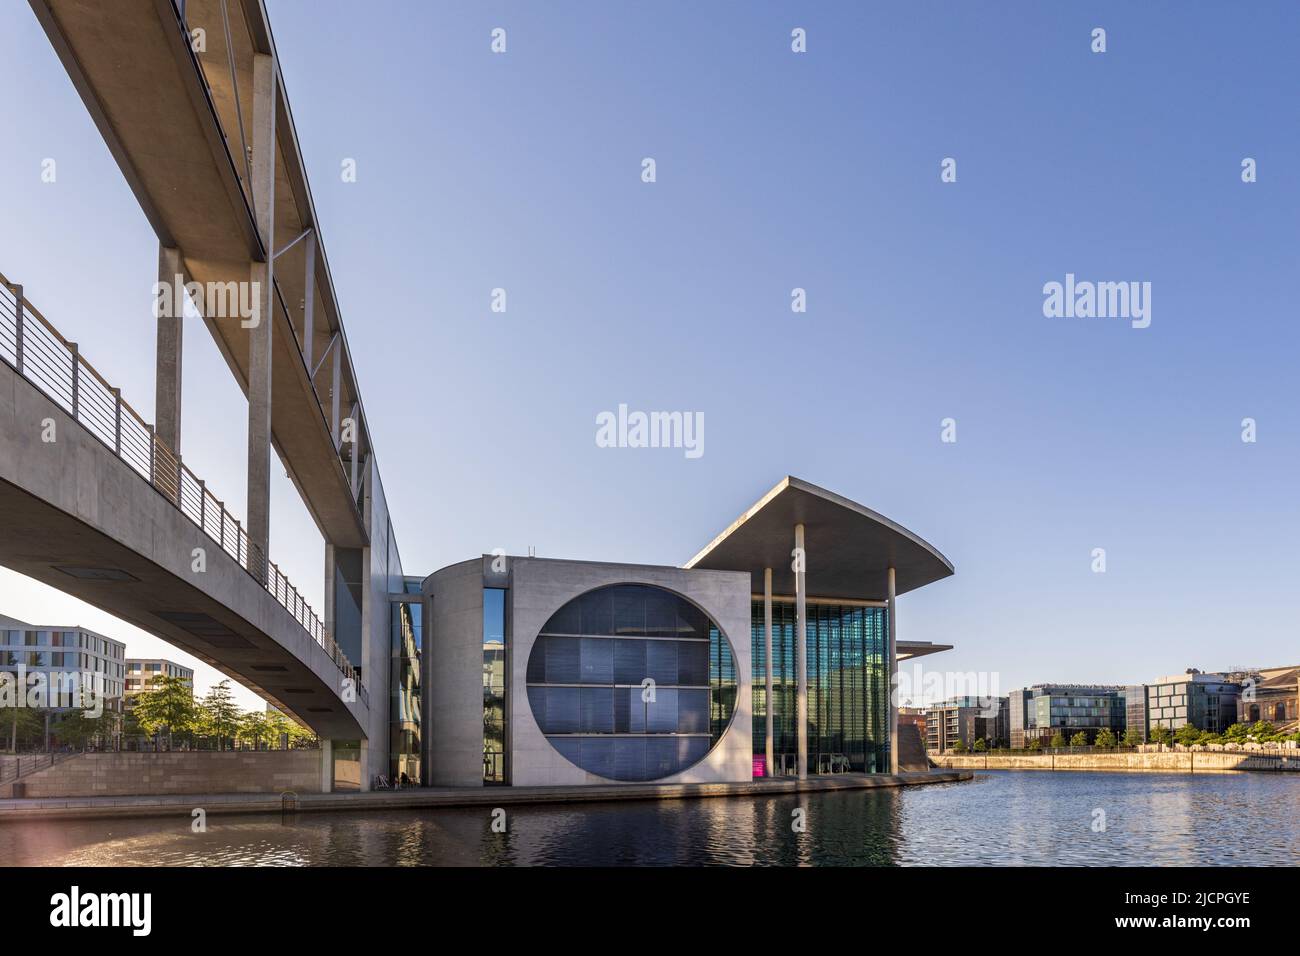 The striking architecture of the Marie Elisabeth Lüders Haus Building by the River Spree, Berlin. Stock Photo